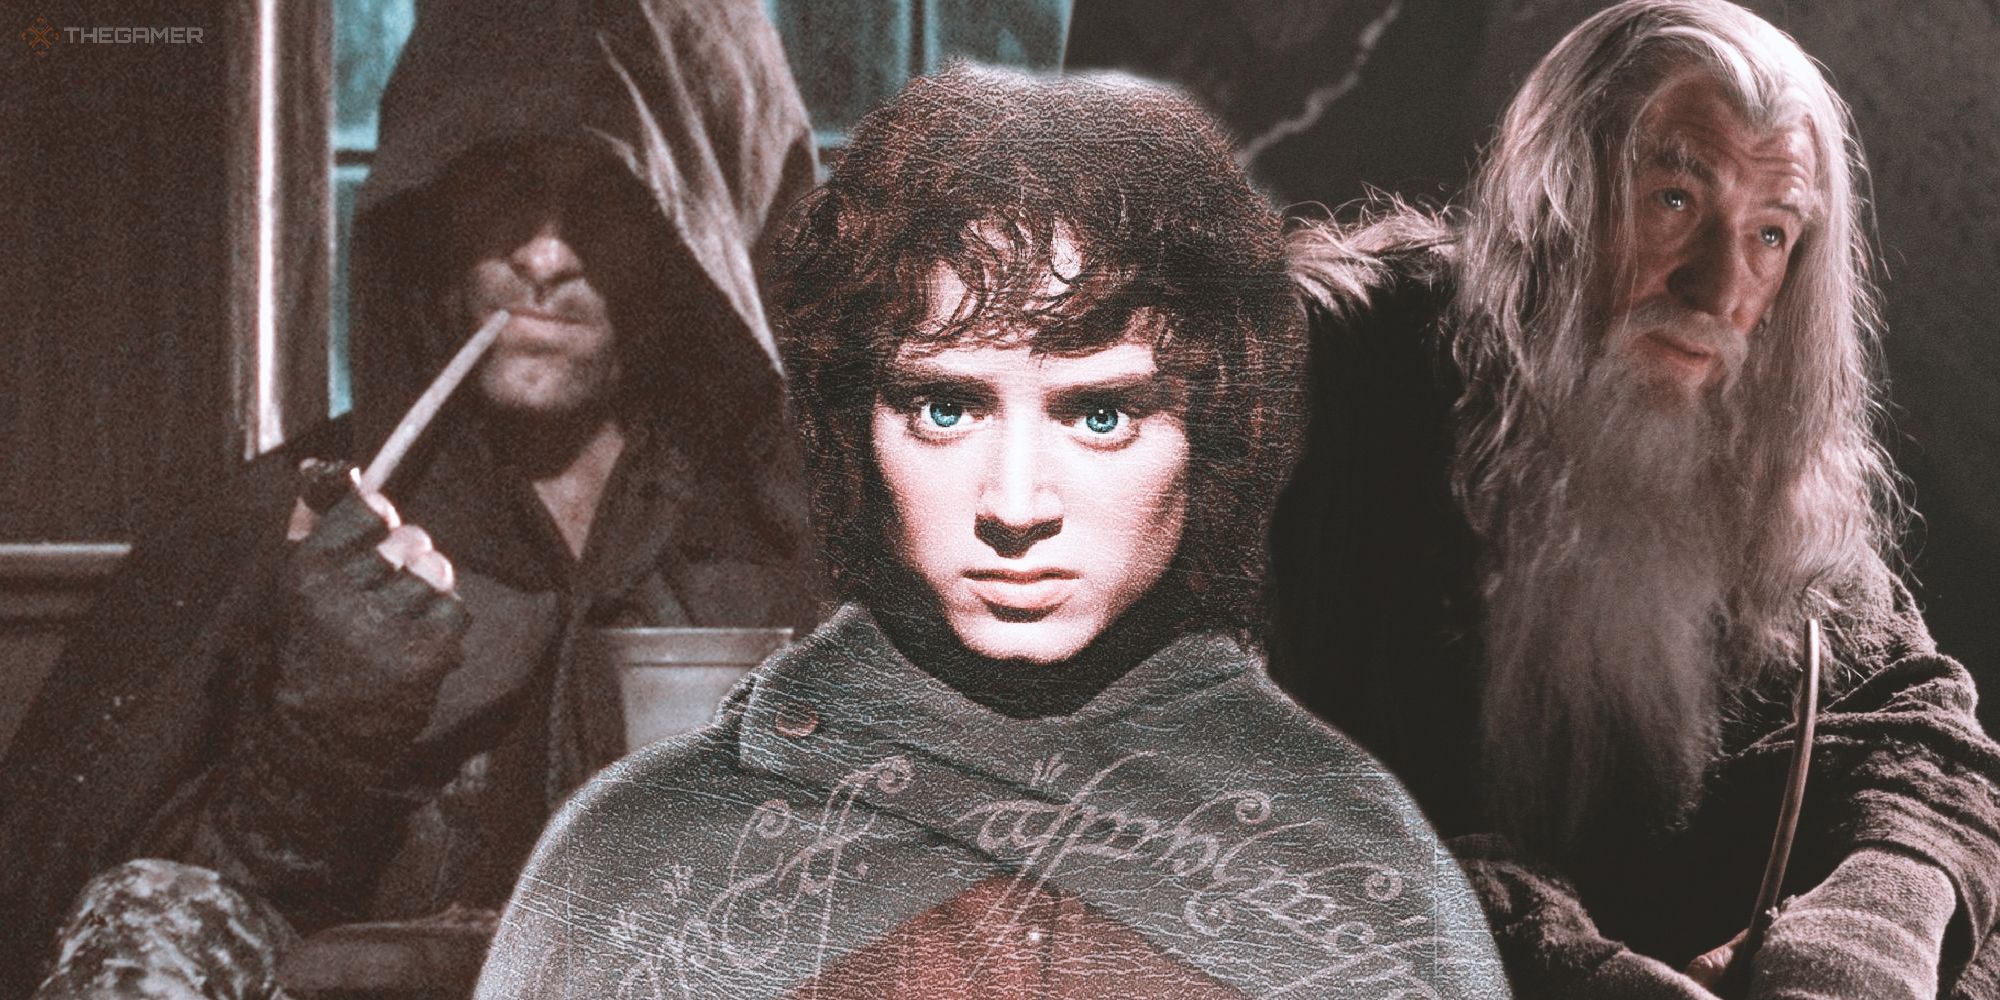 Fellowship of the Ring at 20: the film that revitalised and ruined